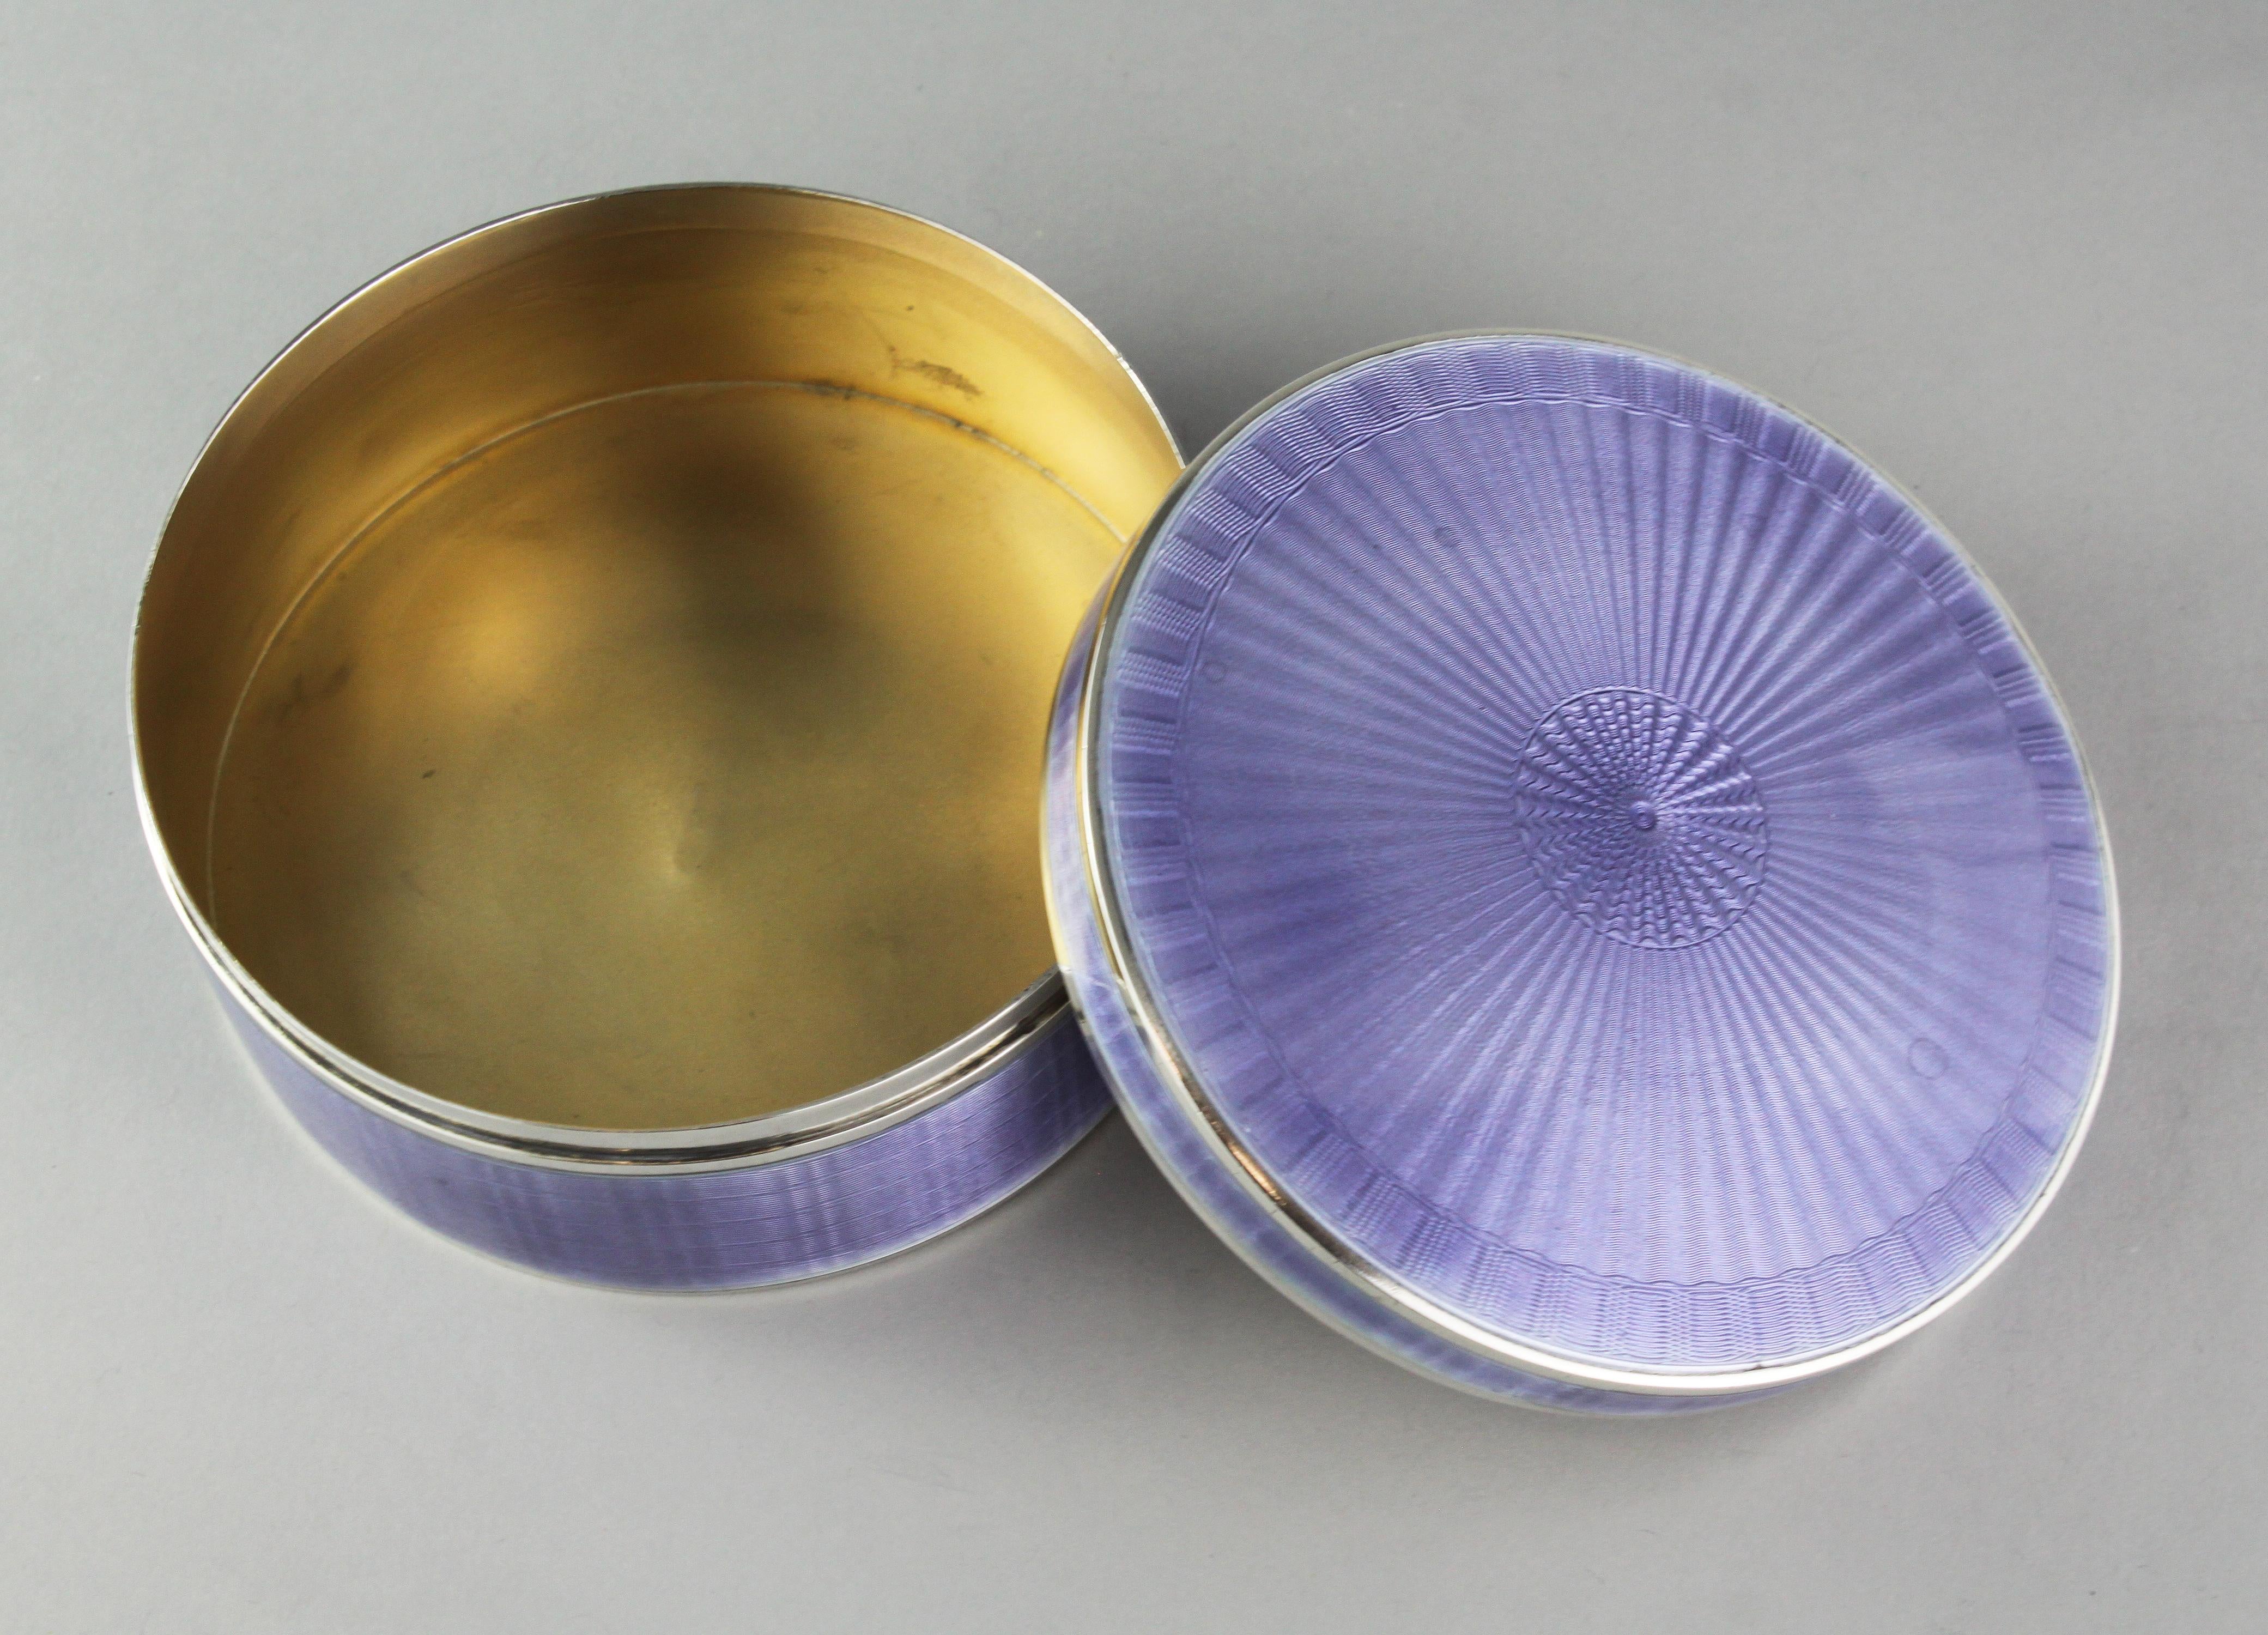 Mid-20th Century Sterling Silver Box with Gilt Interior and Purple Enamel, Elkington & Co, 1945